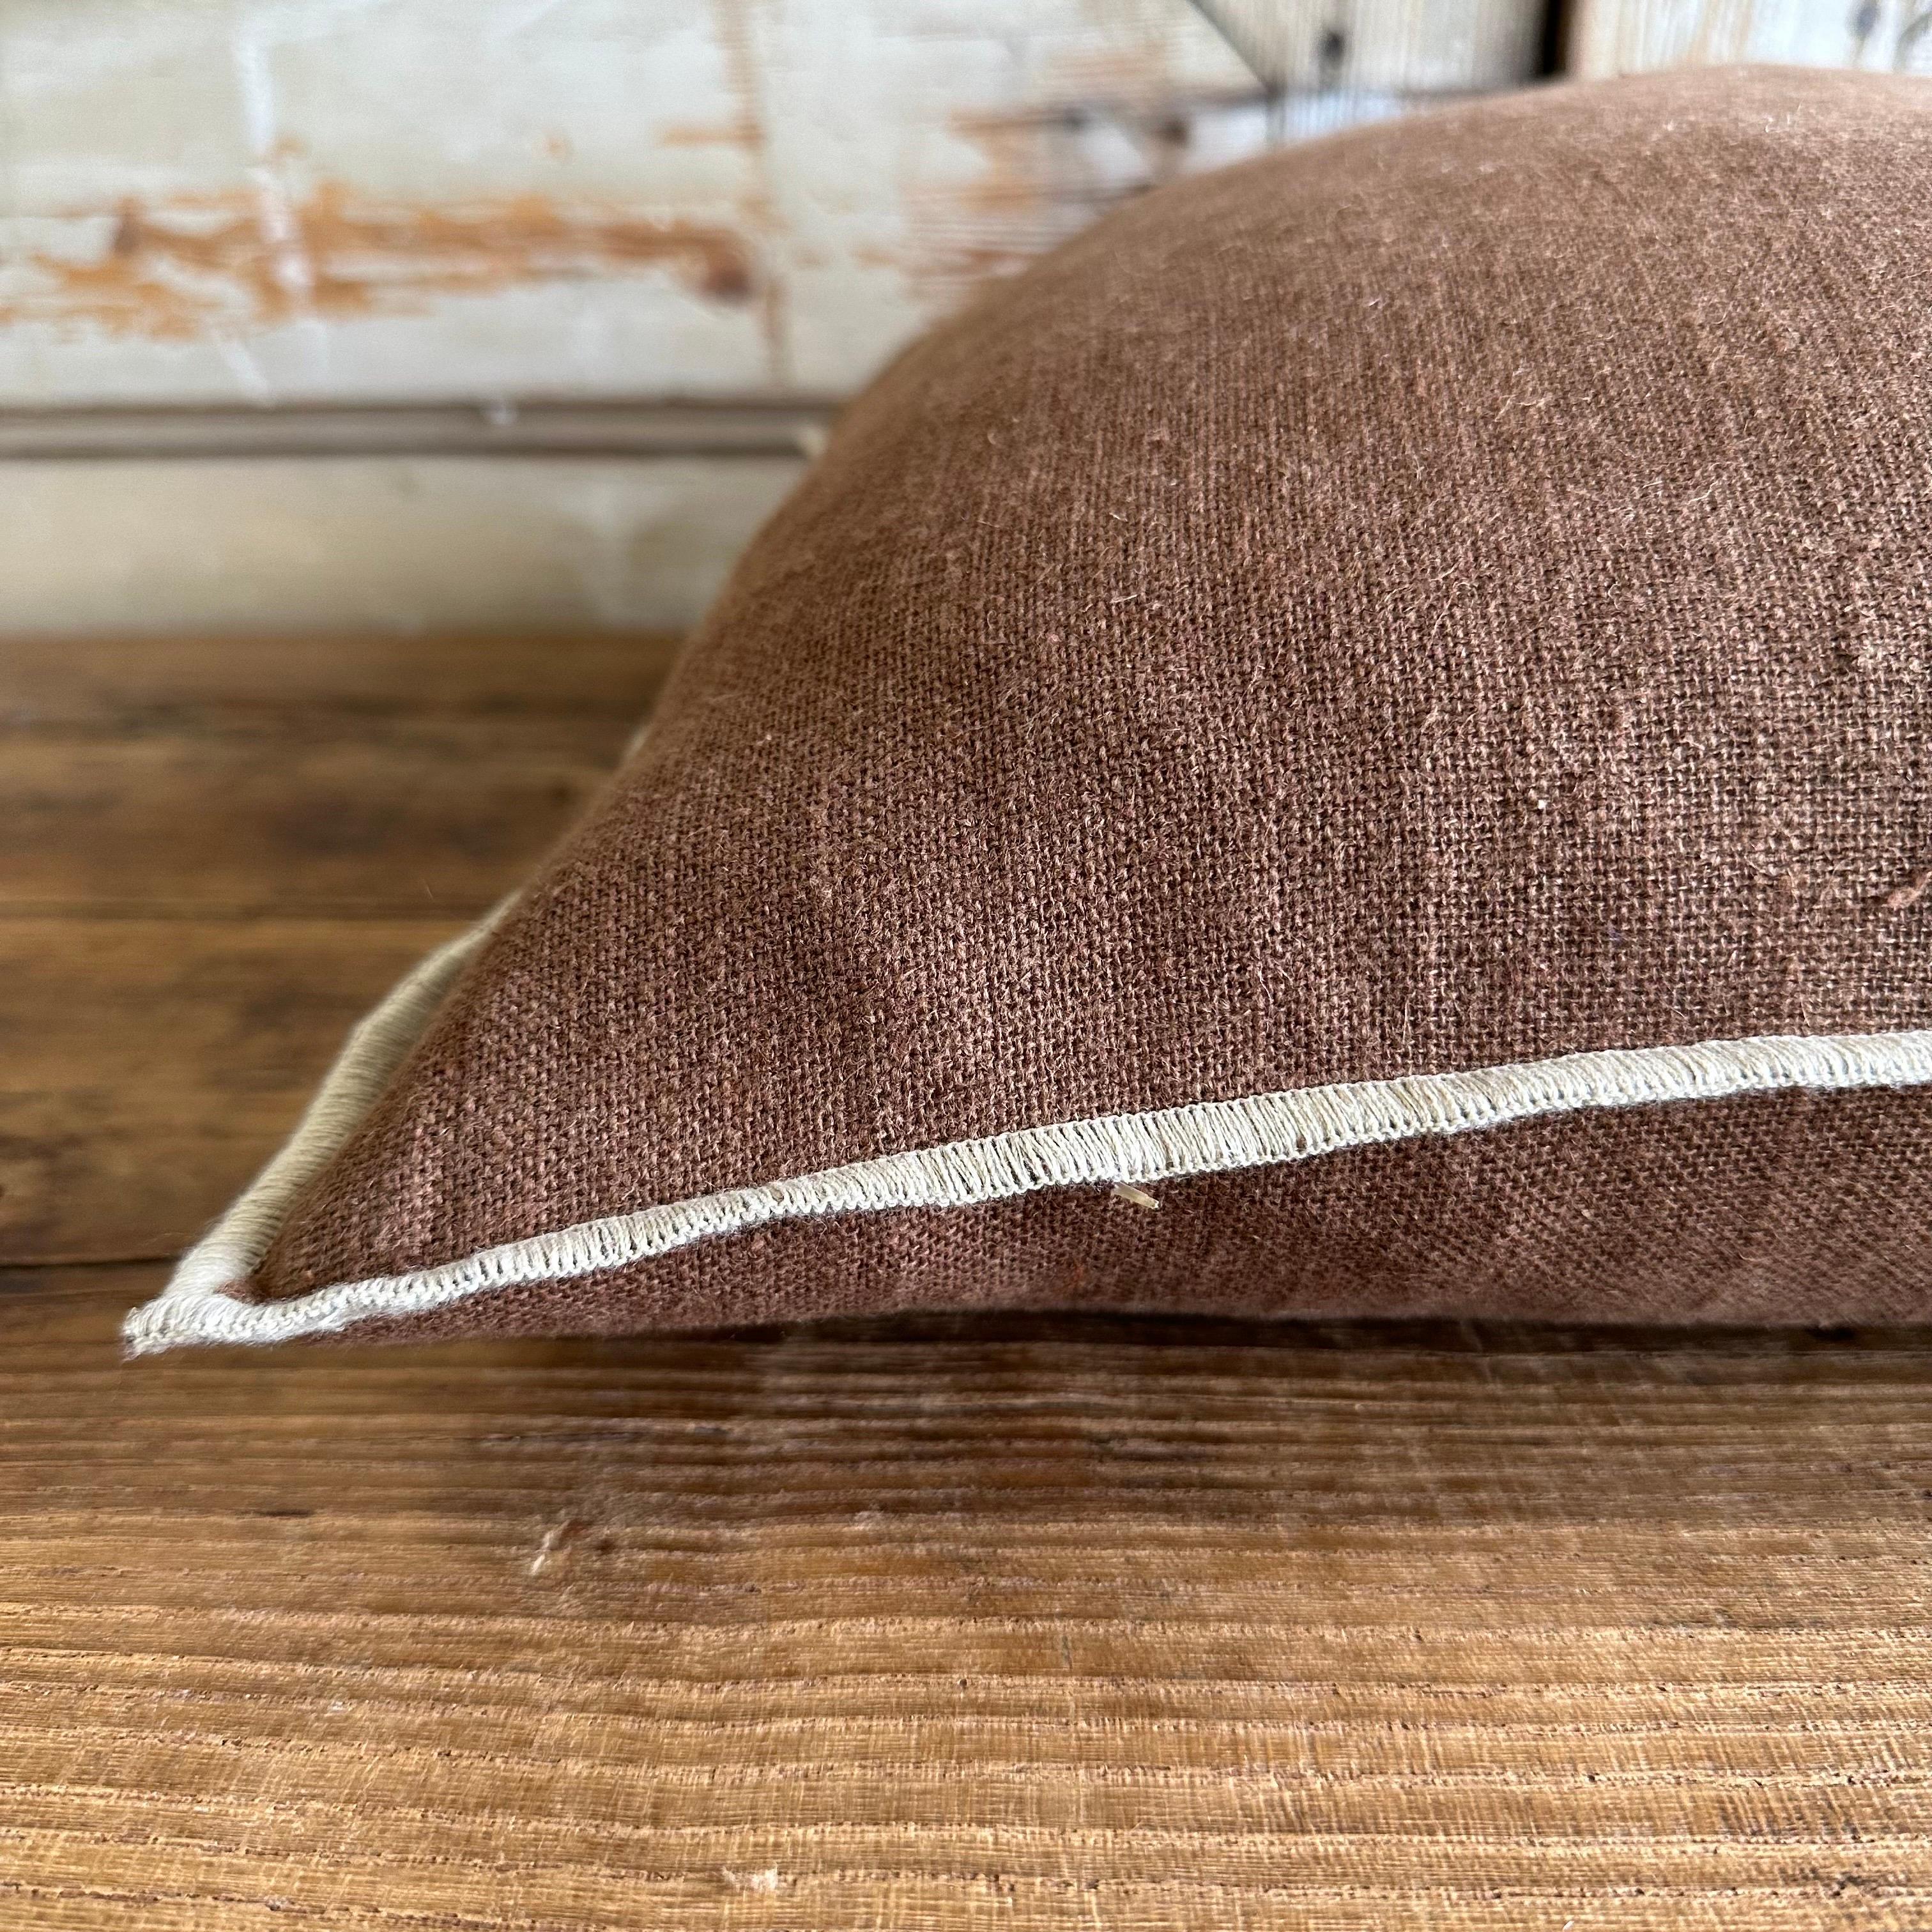 Contemporary French Flax Linen Accent Pillow in Moka For Sale